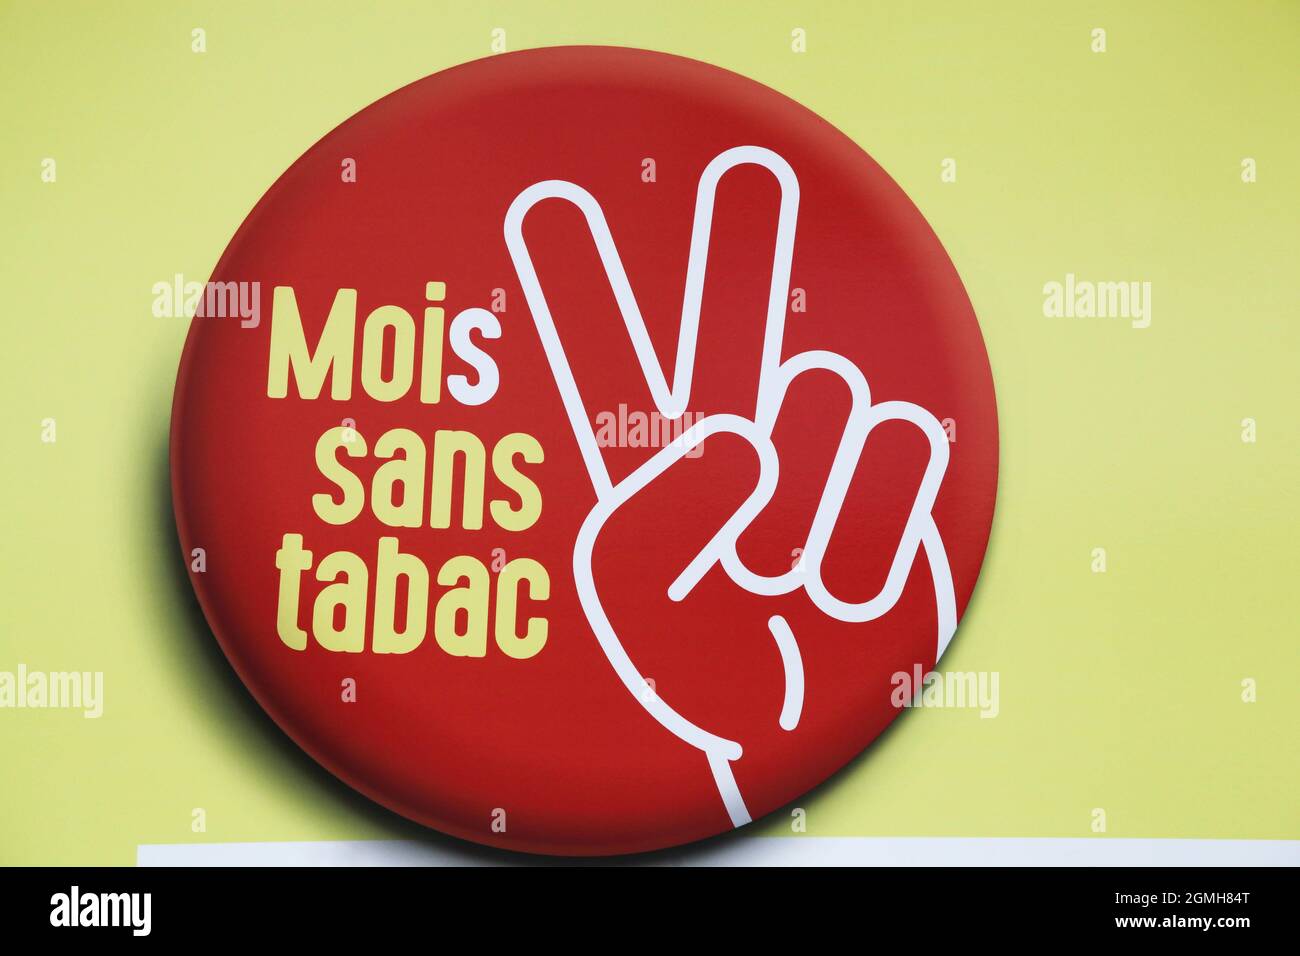 Villefranche, France - November 14, 2018: Month without tobacco sign called mois sans tabac in french language Stock Photo